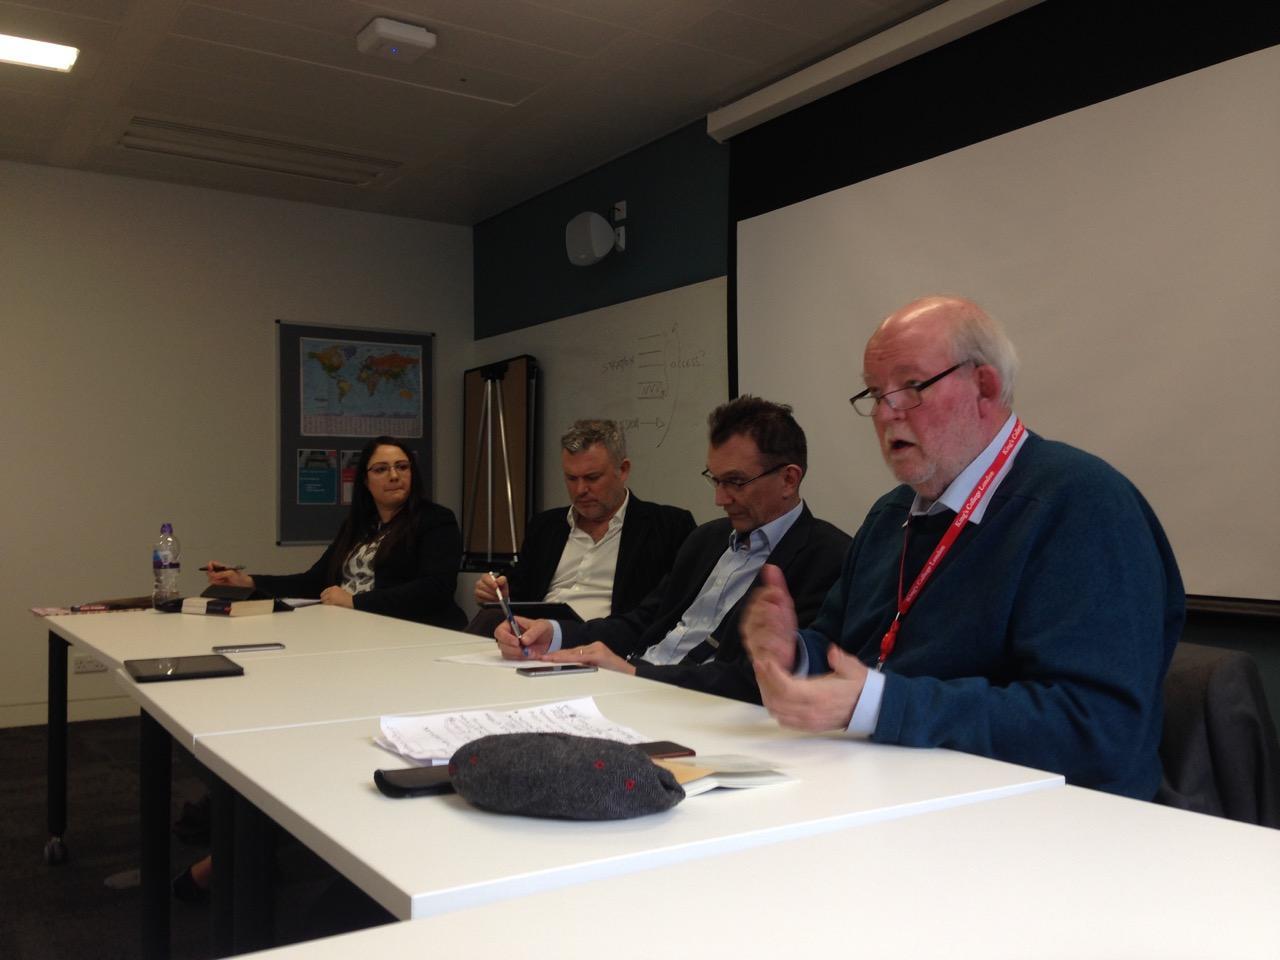 Charles Clarke, right, addressing the ‘Blair Years’ class at King’s College London on Monday, with Michelle Clement, Jon Davis and John Rentoul